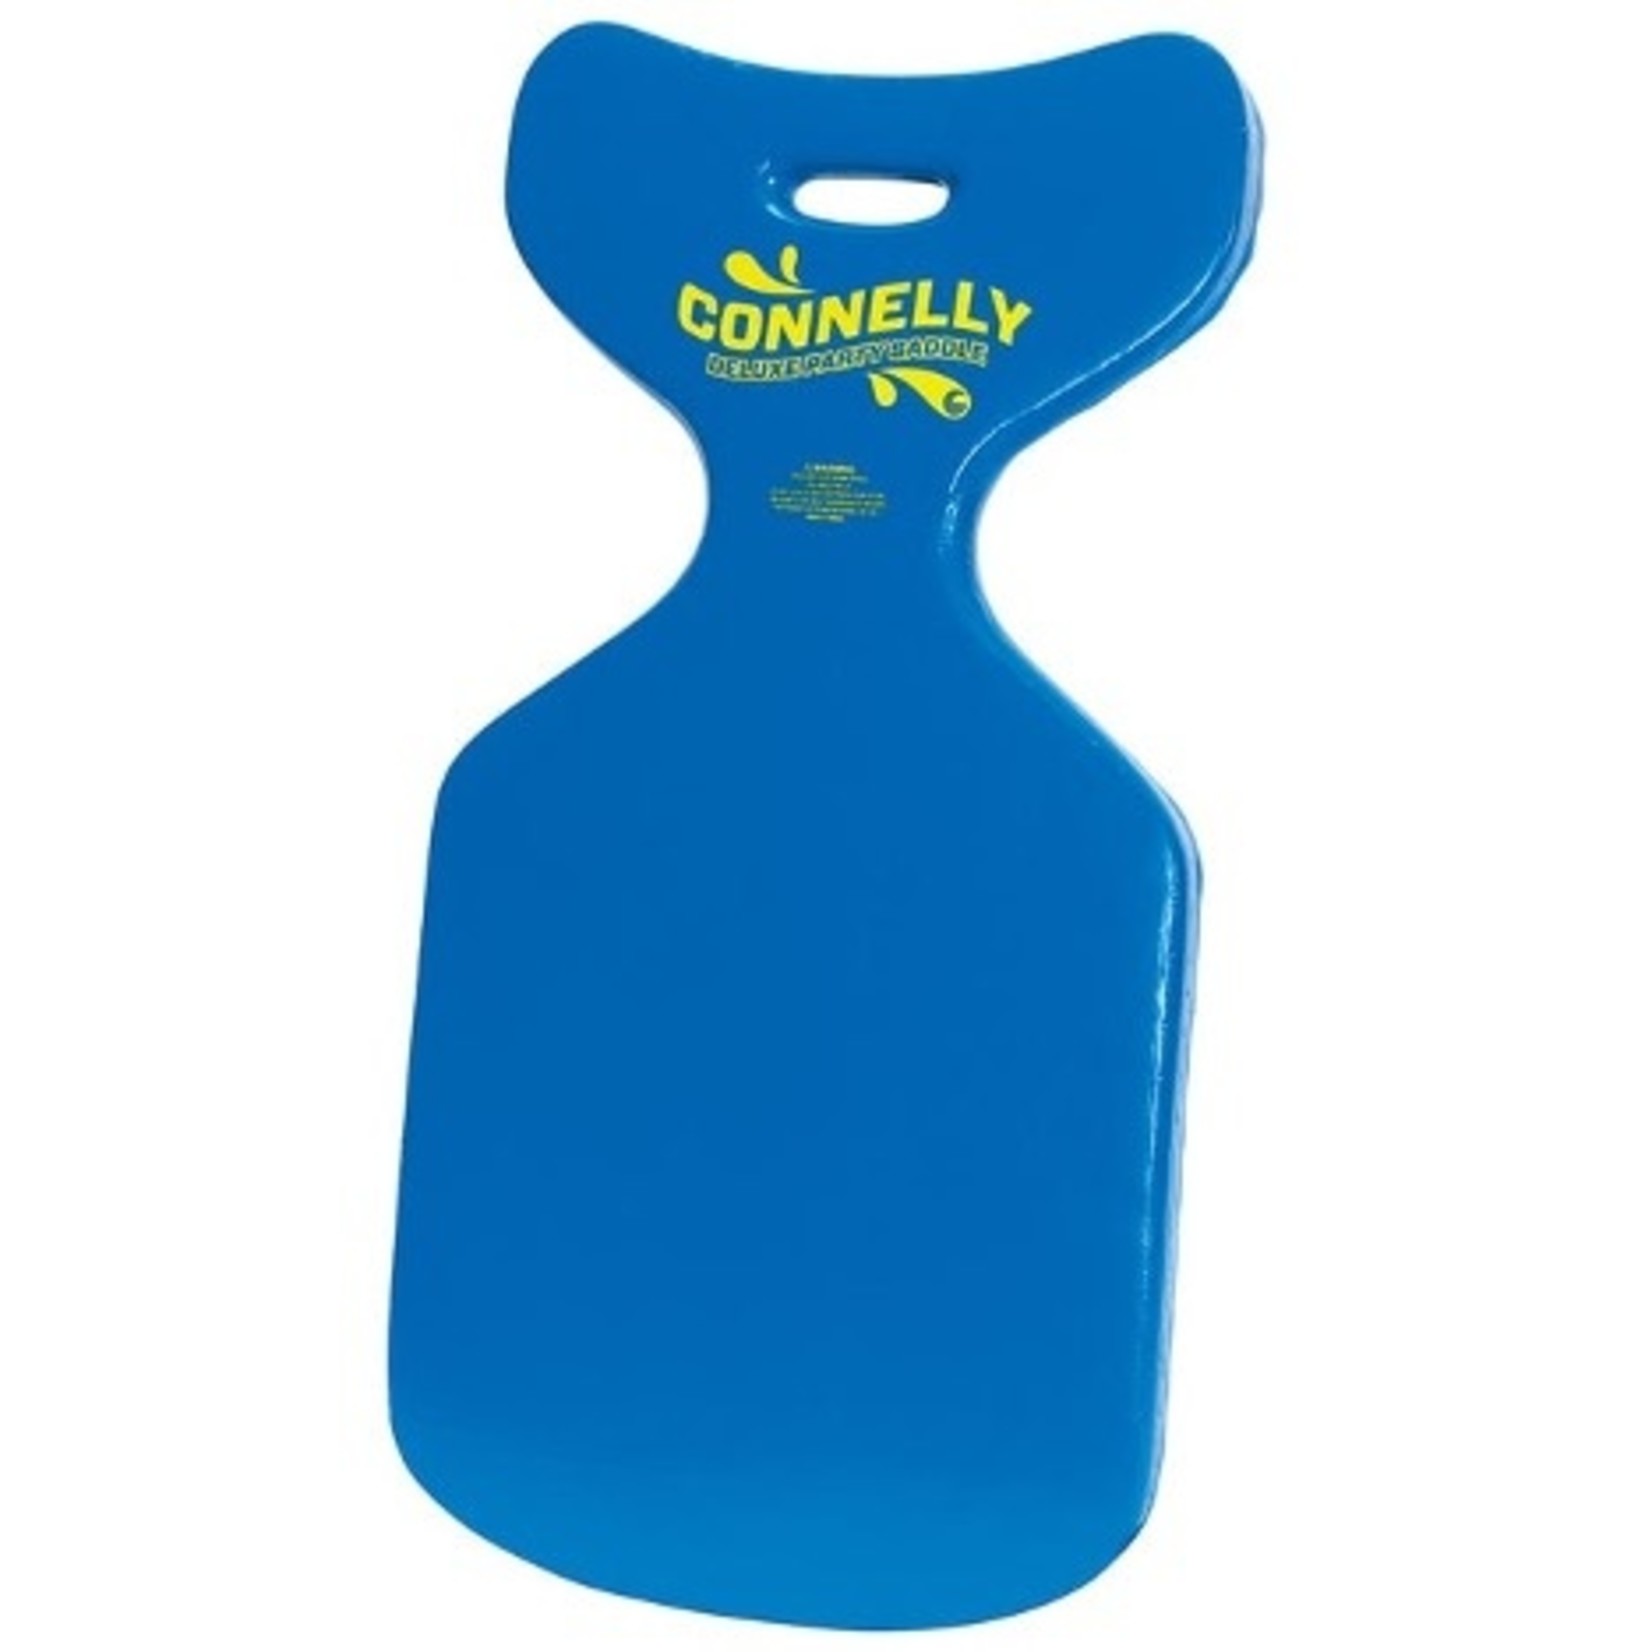 Connelly 2023 Deluxe Party Saddle Blue / Yellow